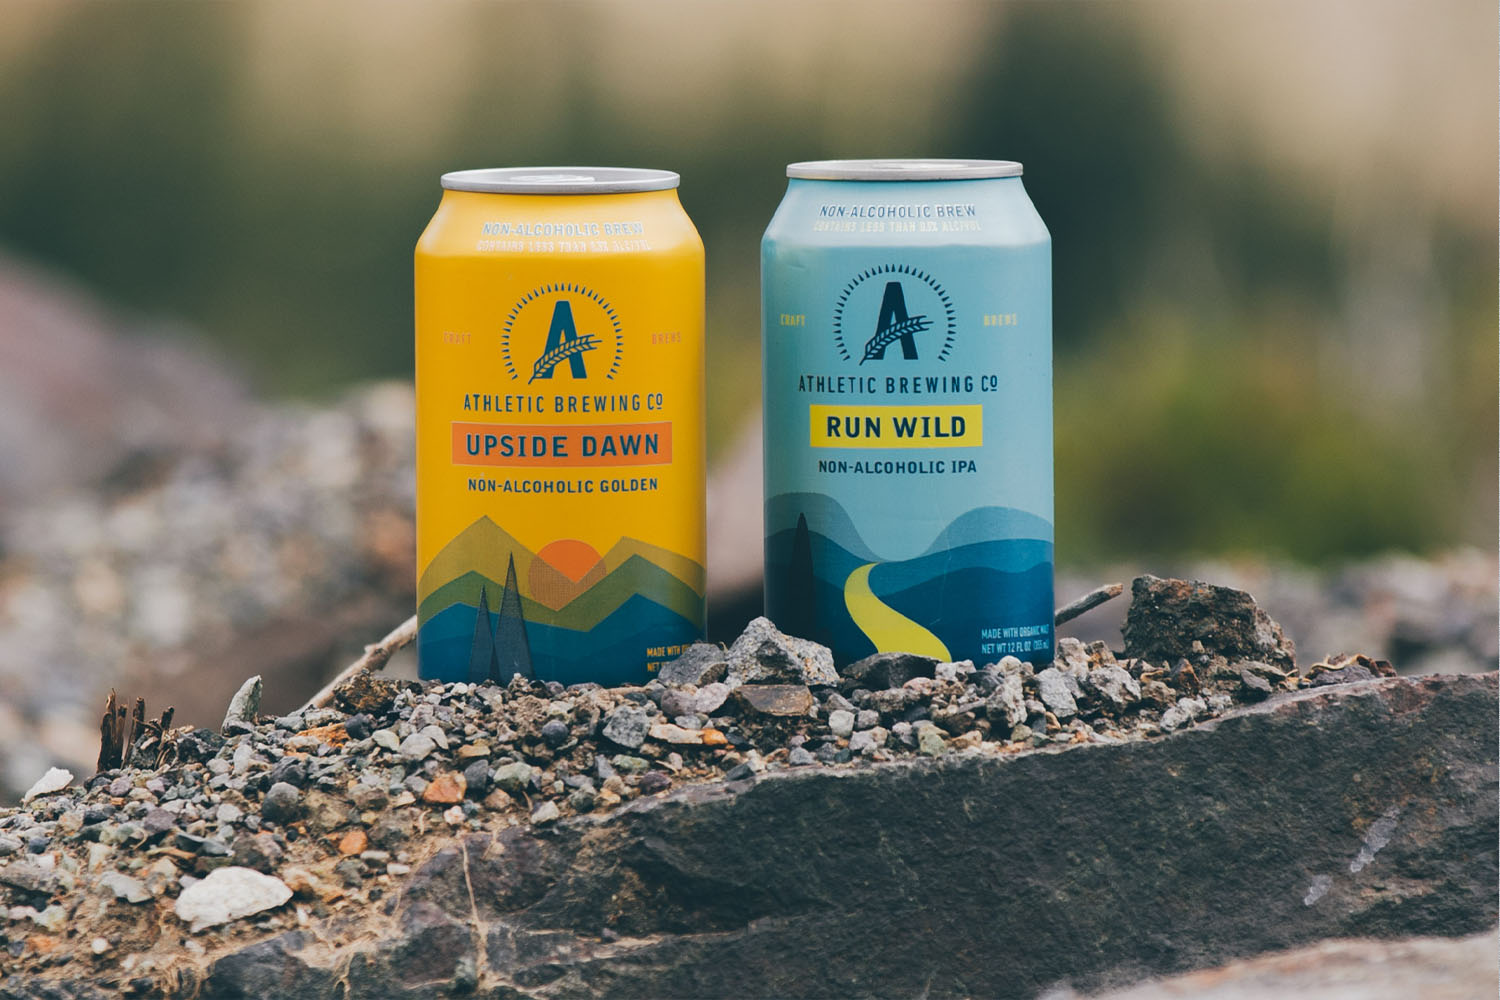 Athletic Brewing's non-alcoholic beer is having a moment